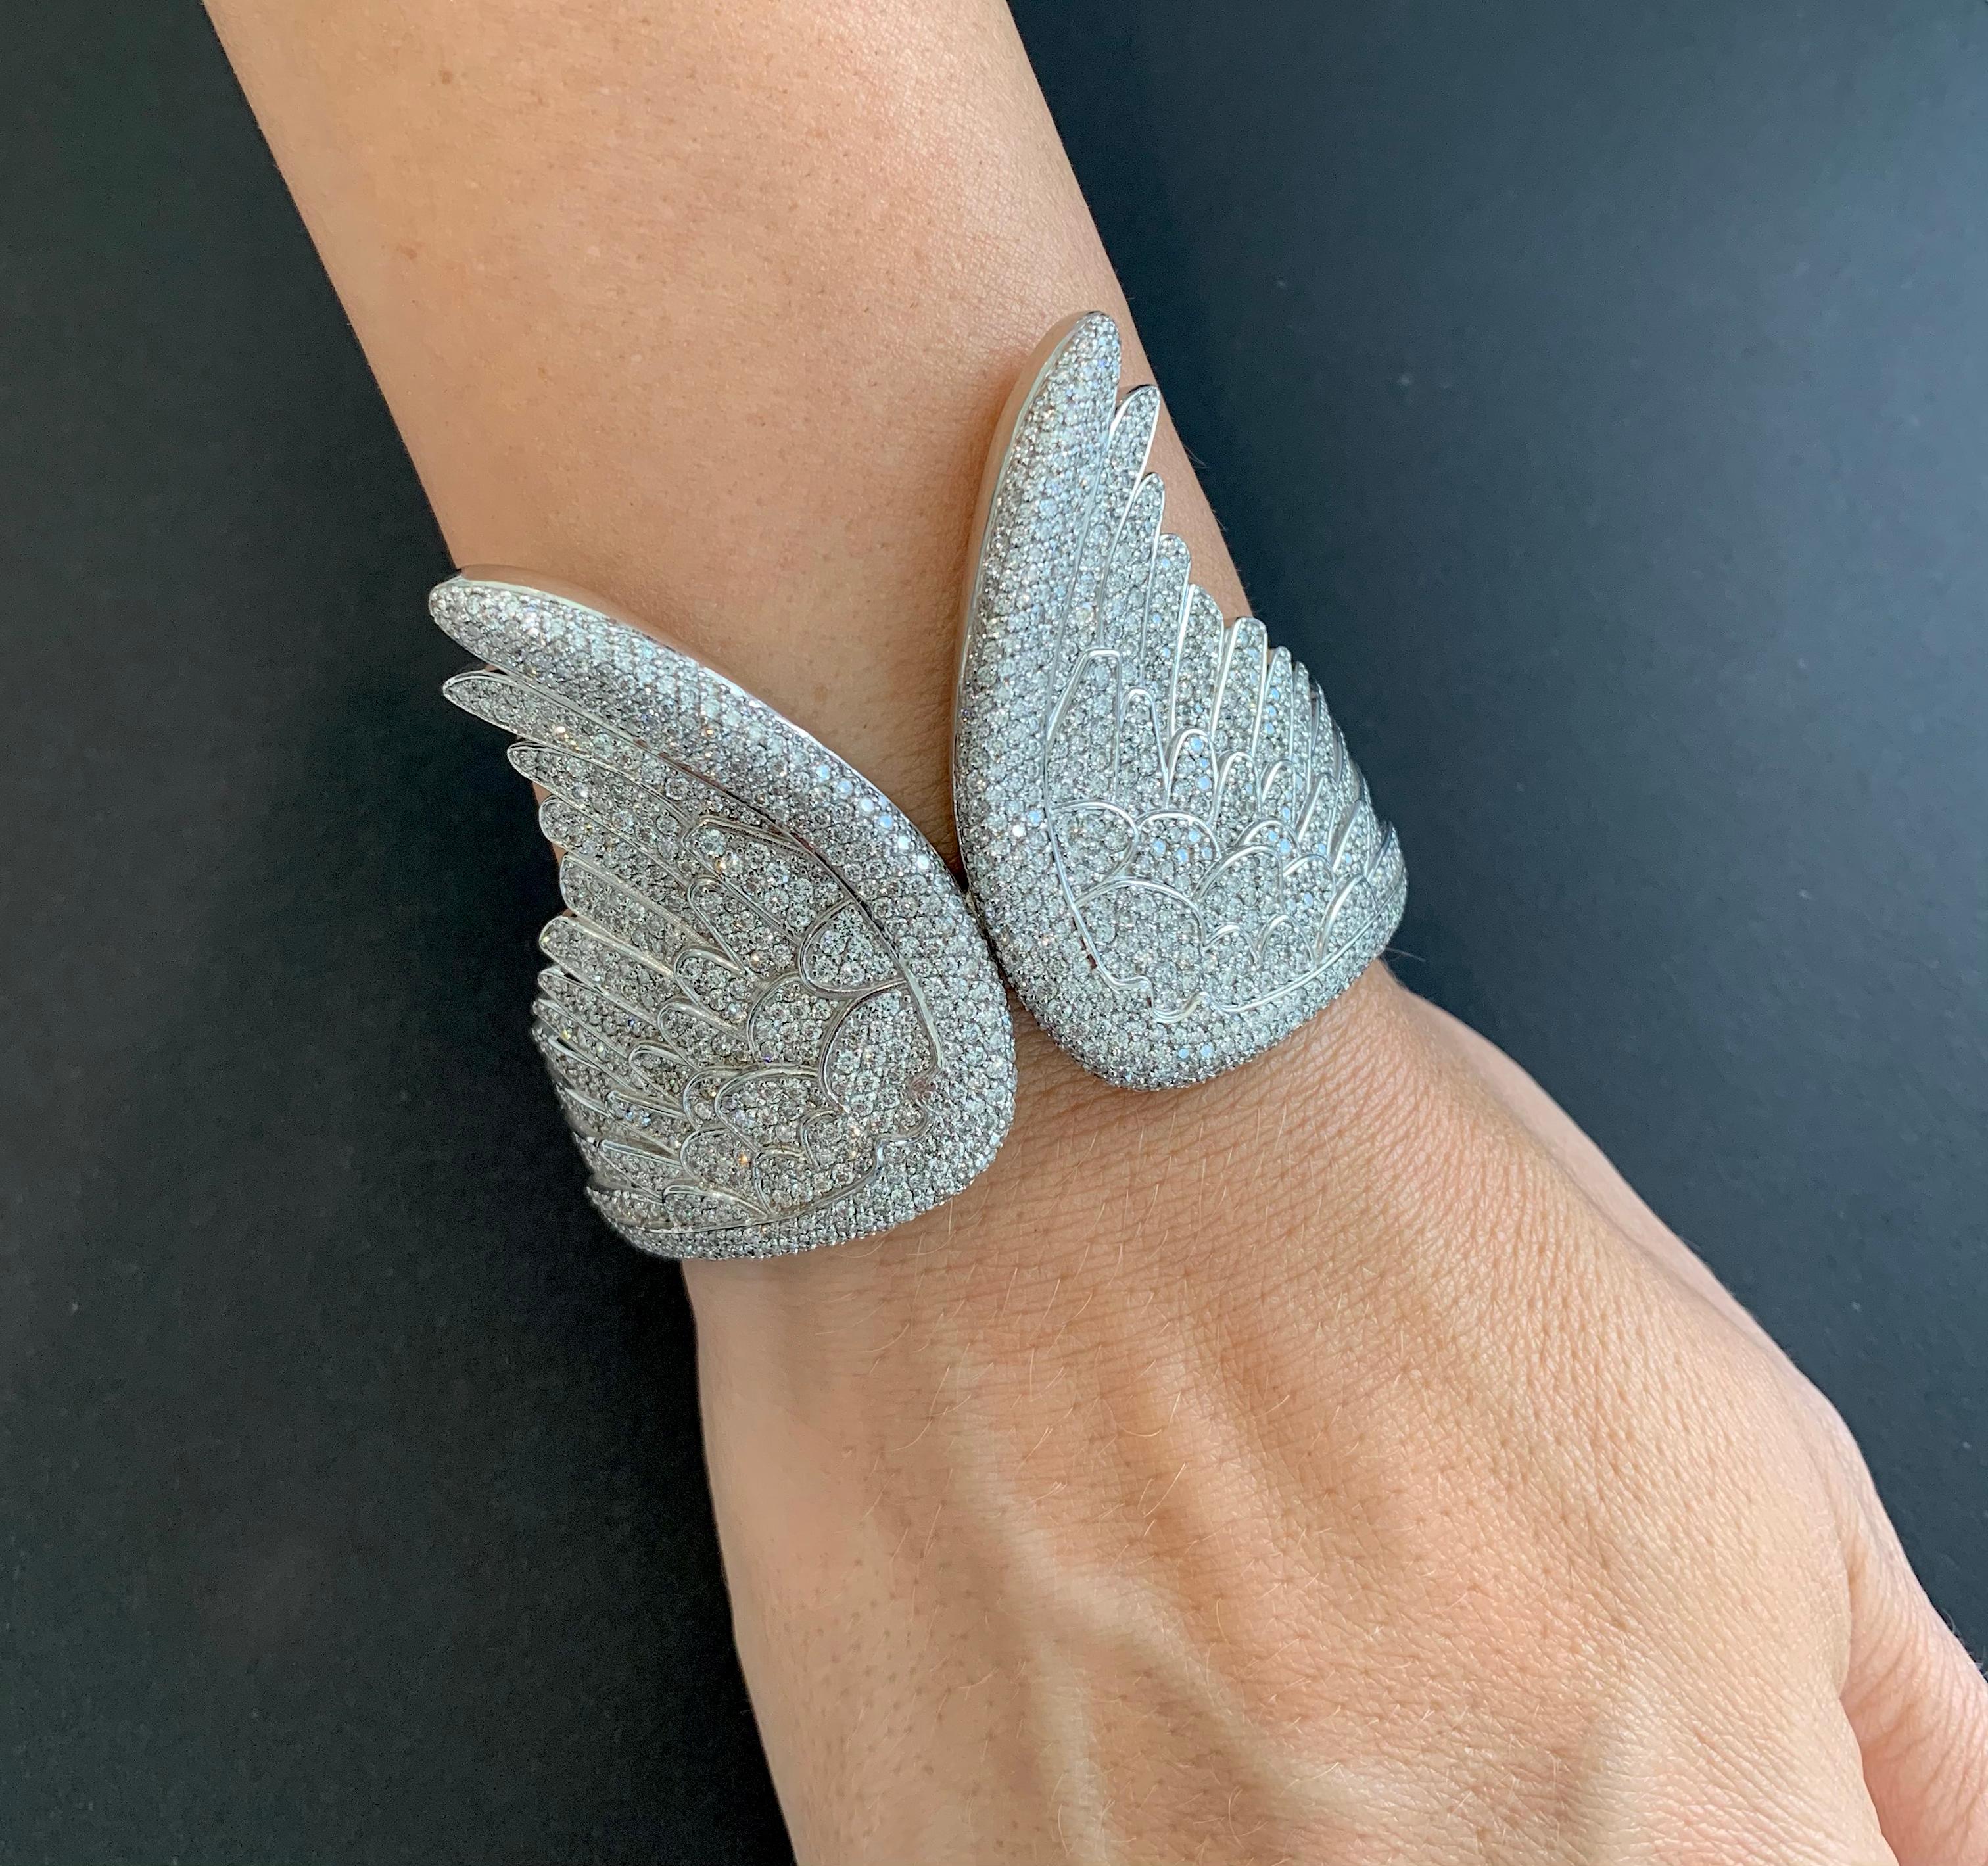 The Angel Wing Cuff
White Diamonds set on White Gold.
Crafted to order. Please allow up to 3 weeks for delivery.